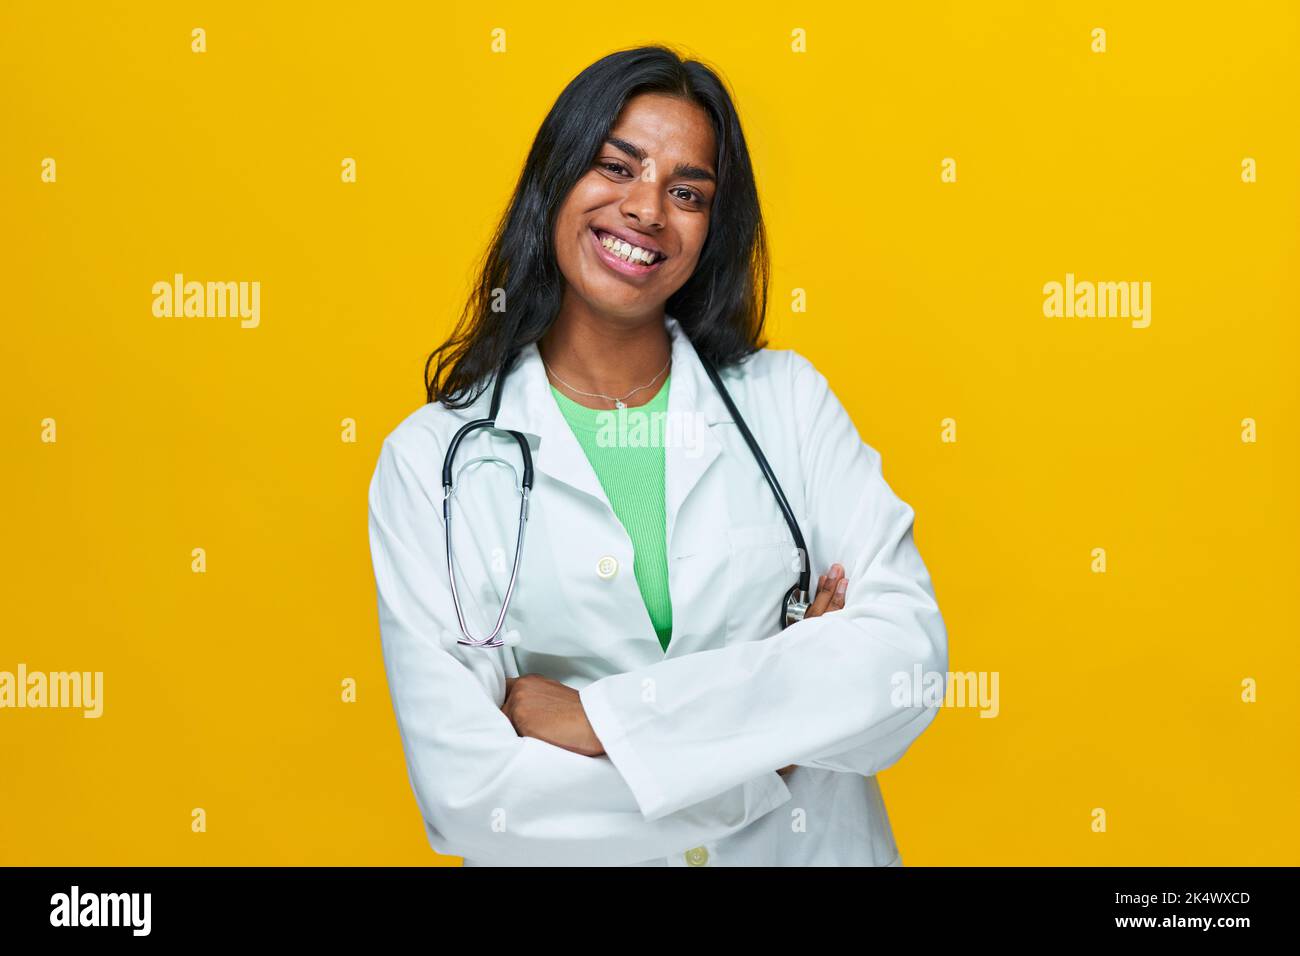 Cheerful young female doctor standing by a yellow background smiling looking camera, isolated Indian Stock Photo